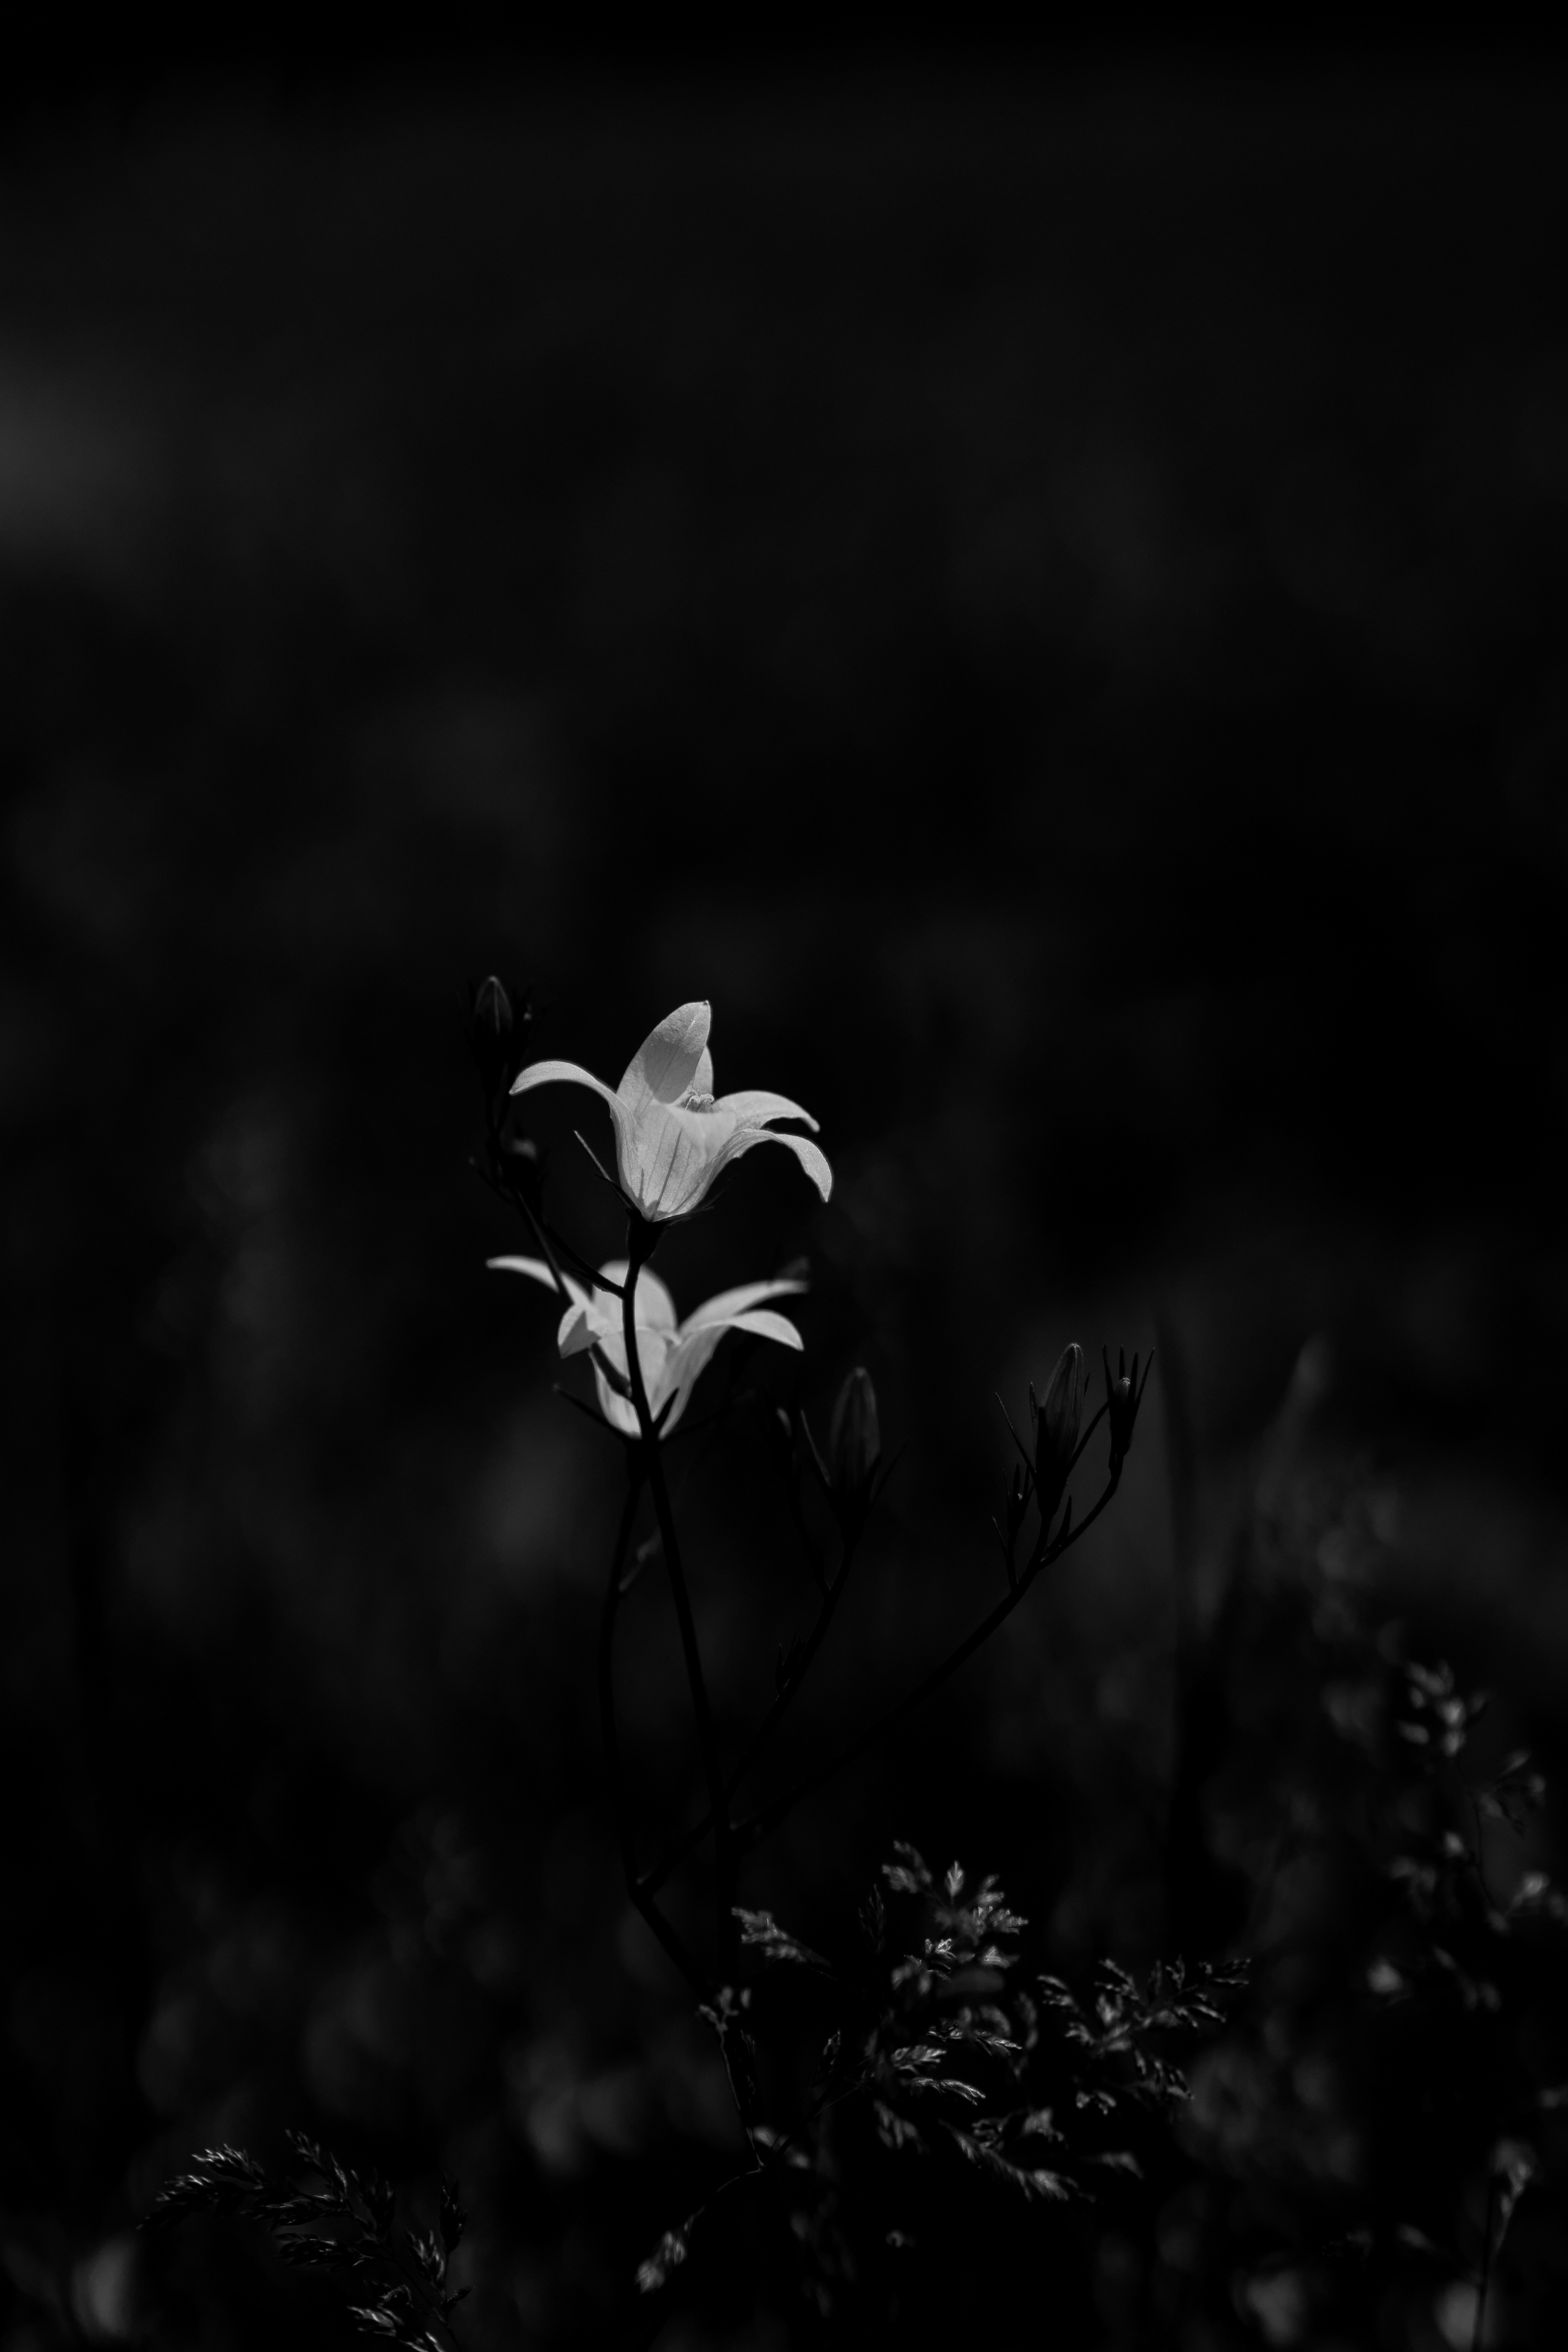 macro, plants, flowers, black, bw, chb, bell cell phone wallpapers